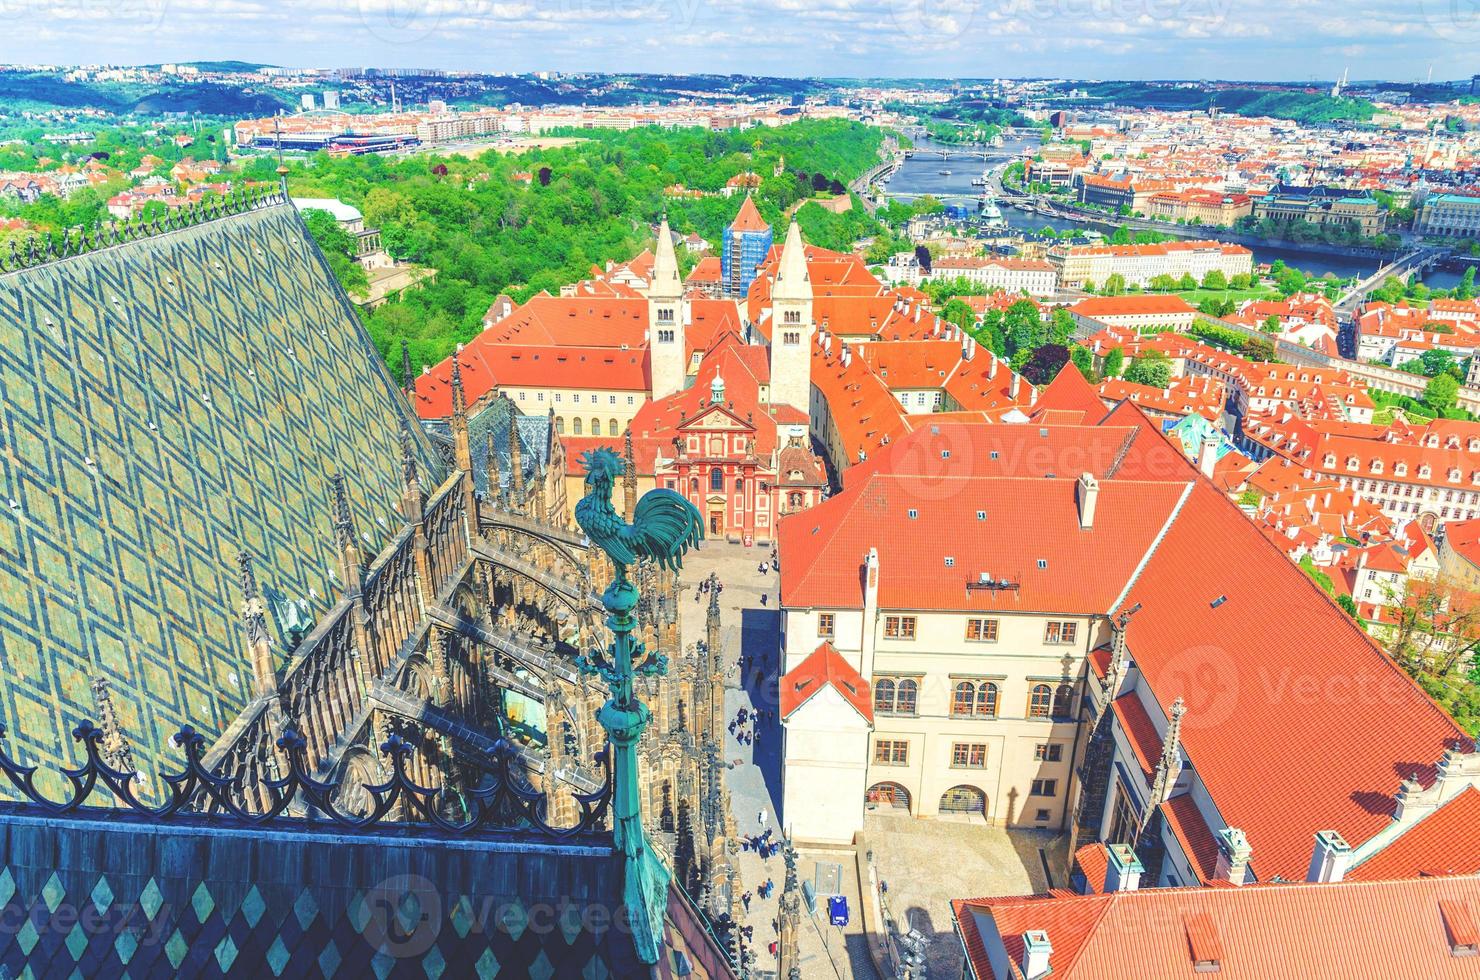 Top aerial view of Prague with courtyard square of Prague Castle and Old Royal Palace photo